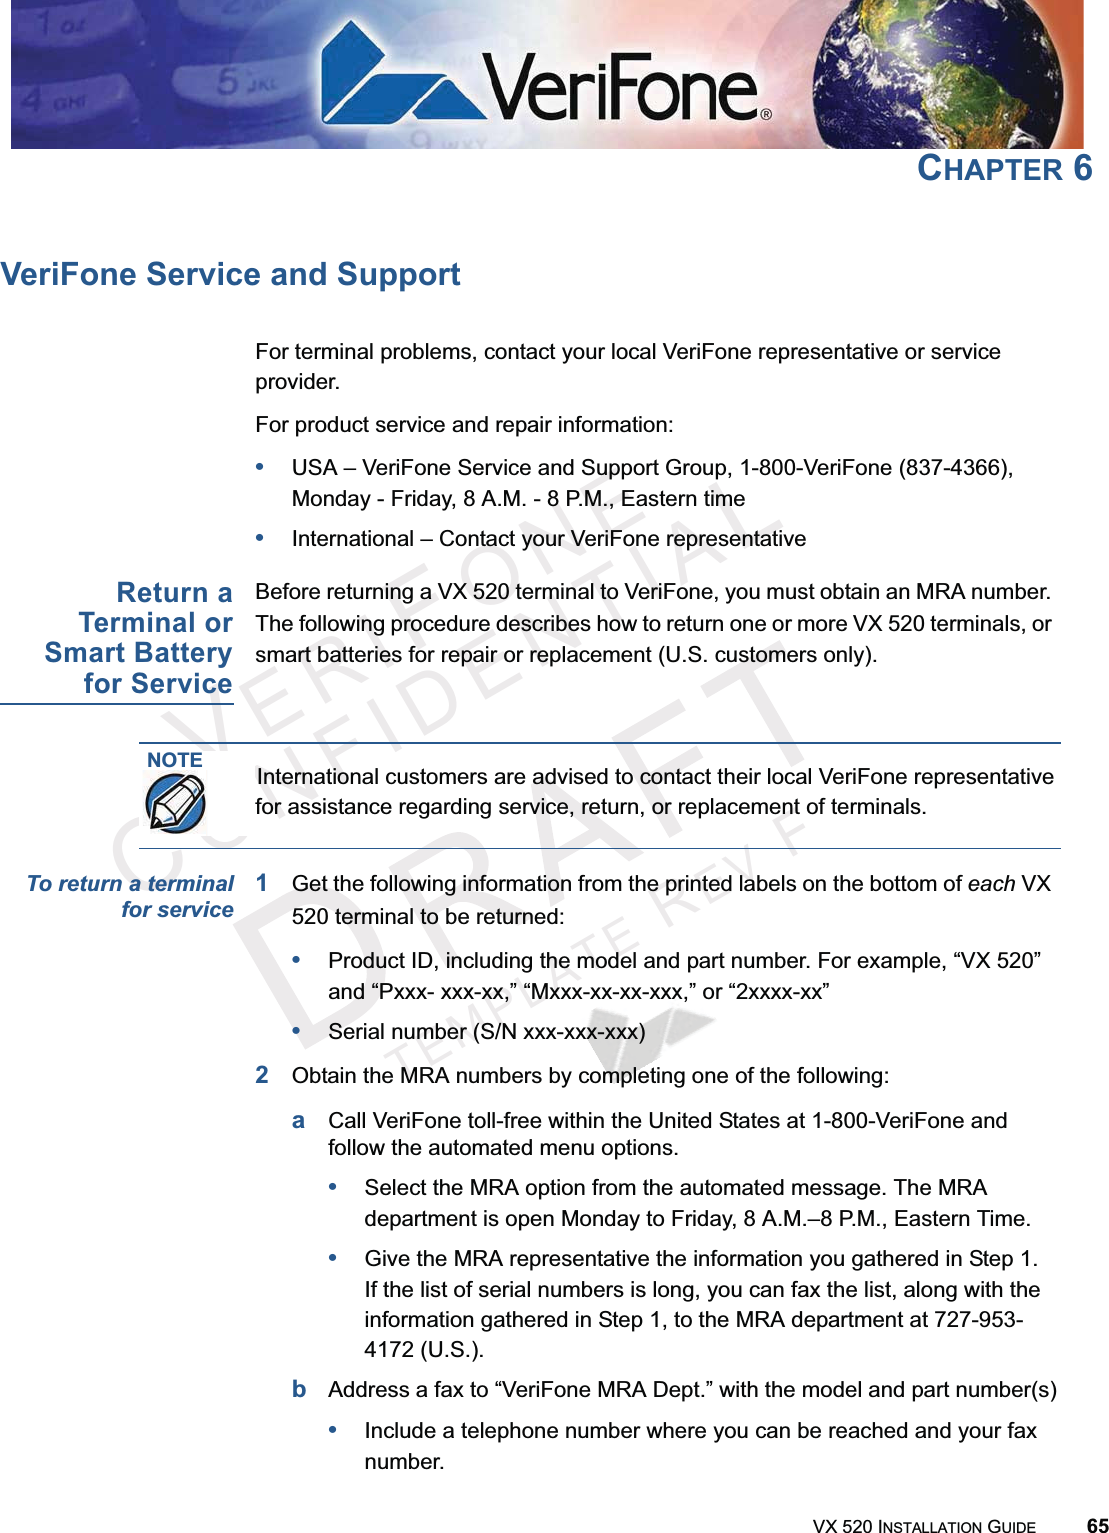 VERIFONECONFIDENTIALTEMPLATEREVFVX 520 INSTALLATION GUIDE 65CHAPTER 6VeriFone Service and SupportFor terminal problems, contact your local VeriFone representative or service provider. For product service and repair information:•USA – VeriFone Service and Support Group, 1-800-VeriFone (837-4366), Monday - Friday, 8 A.M. - 8 P.M., Eastern time•International – Contact your VeriFone representative Return aTerminal orSmart Batteryfor ServiceBefore returning a VX 520 terminal to VeriFone, you must obtain an MRA number. The following procedure describes how to return one or more VX 520 terminals, or smart batteries for repair or replacement (U.S. customers only). To return a terminalfor service1Get the following information from the printed labels on the bottom of each VX 520 terminal to be returned:•Product ID, including the model and part number. For example, “VX 520” and “Pxxx- xxx-xx,” “Mxxx-xx-xx-xxx,” or “2xxxx-xx”•Serial number (S/N xxx-xxx-xxx)2Obtain the MRA numbers by completing one of the following:aCall VeriFone toll-free within the United States at 1-800-VeriFone and follow the automated menu options.•Select the MRA option from the automated message. The MRA department is open Monday to Friday, 8 A.M.–8 P.M., Eastern Time.•Give the MRA representative the information you gathered in Step 1.If the list of serial numbers is long, you can fax the list, along with the information gathered in Step 1, to the MRA department at 727-953-4172 (U.S.).bAddress a fax to “VeriFone MRA Dept.” with the model and part number(s)•Include a telephone number where you can be reached and your fax number.NOTEInternational customers are advised to contact their local VeriFone representative for assistance regarding service, return, or replacement of terminals.